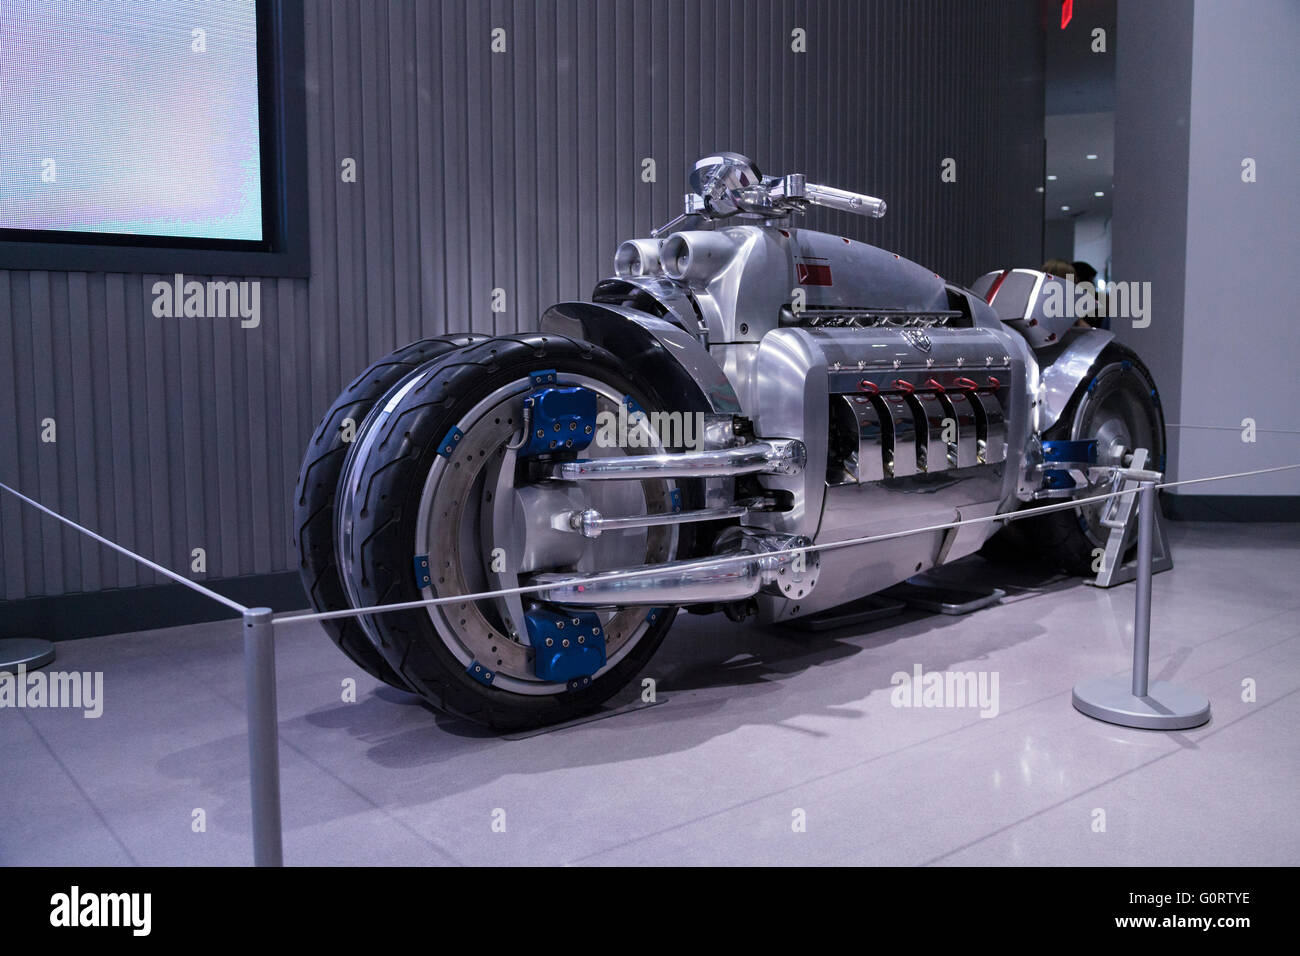 2003 Dodge Tomahawk motorcycle was one of only 9 built and is named after the military cruise missile. Stock Photo